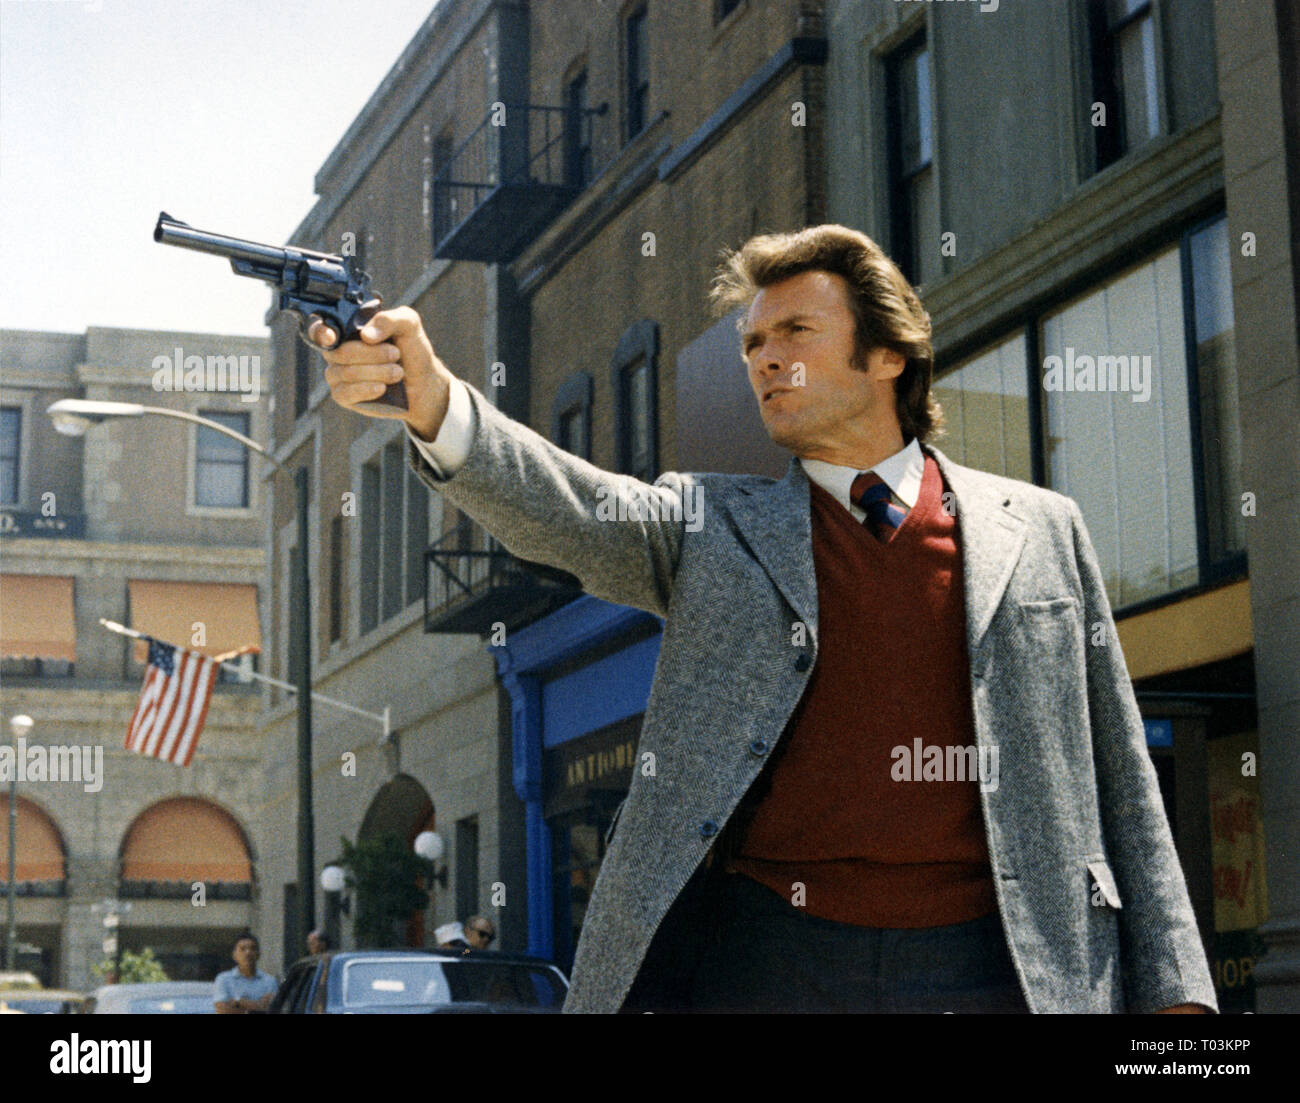 50 Years Ago: Clint Eastwood Flouts the Law in 'Dirty Harry